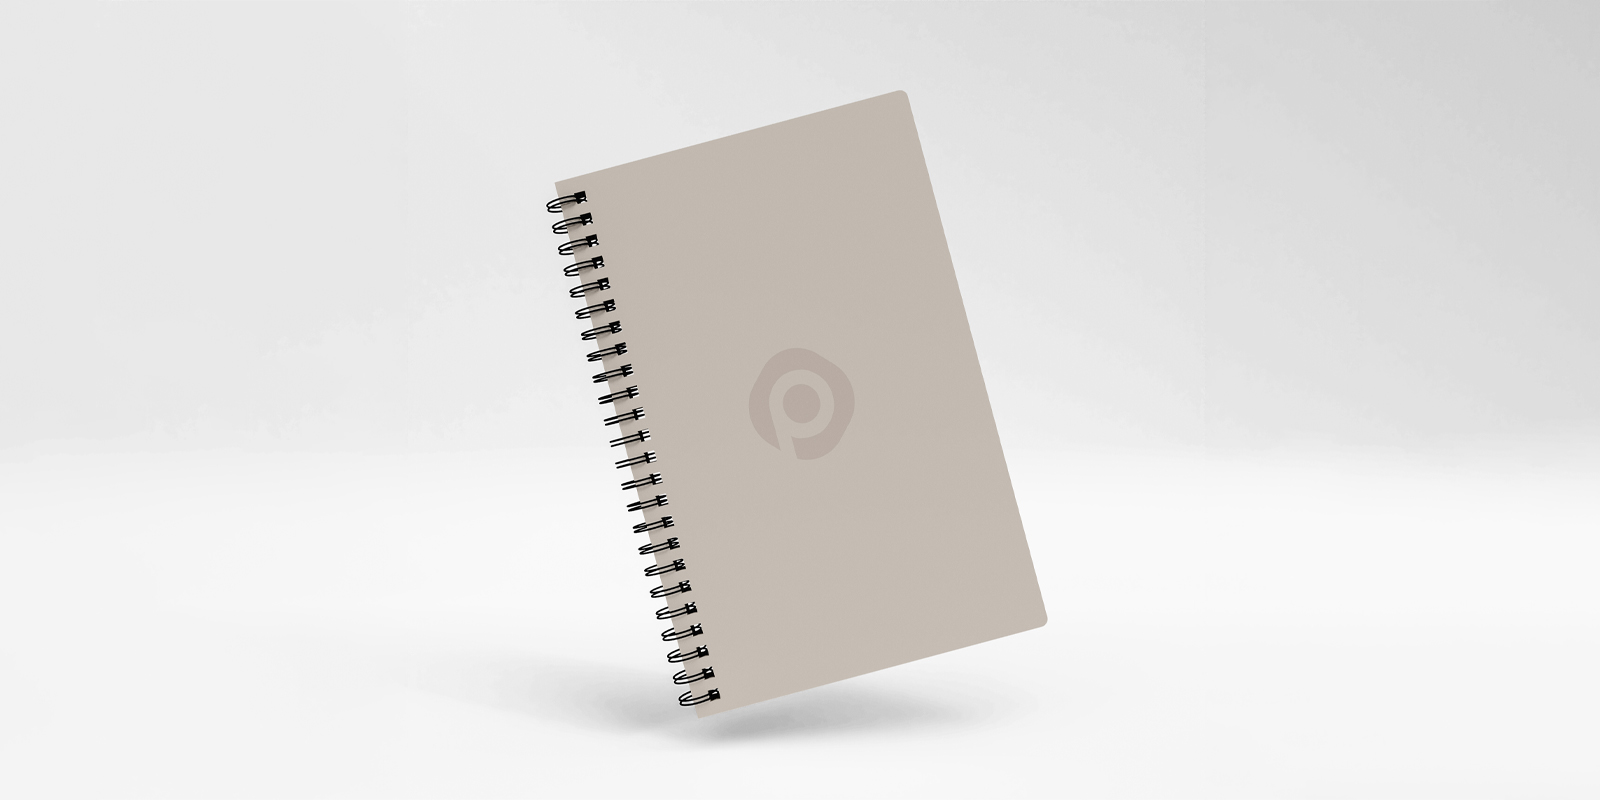 Spiral notebooks in Melbourne - Print with Pagerr